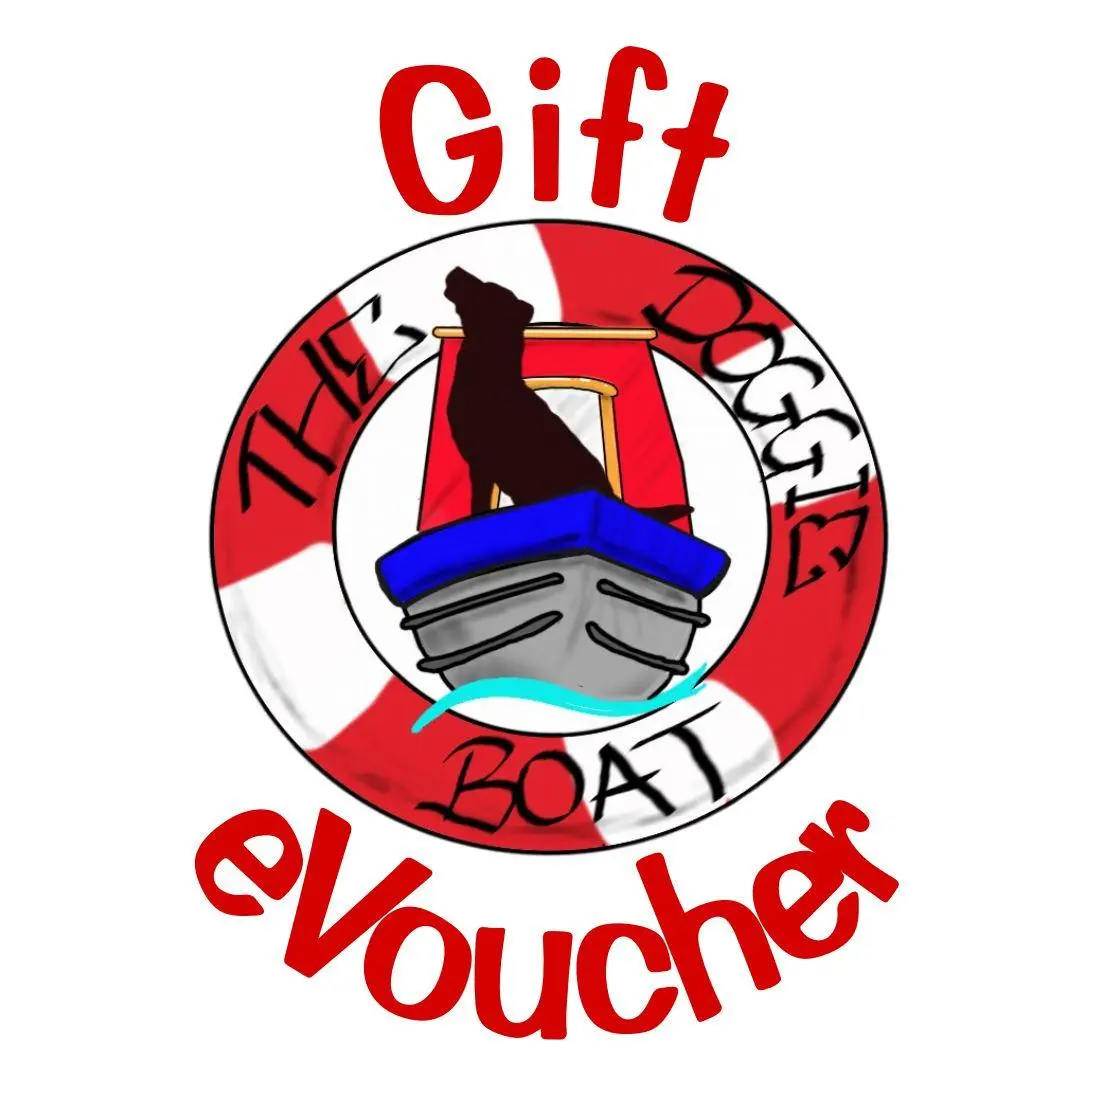 Doggie Boat Gift eVoucher - Click here for more info!